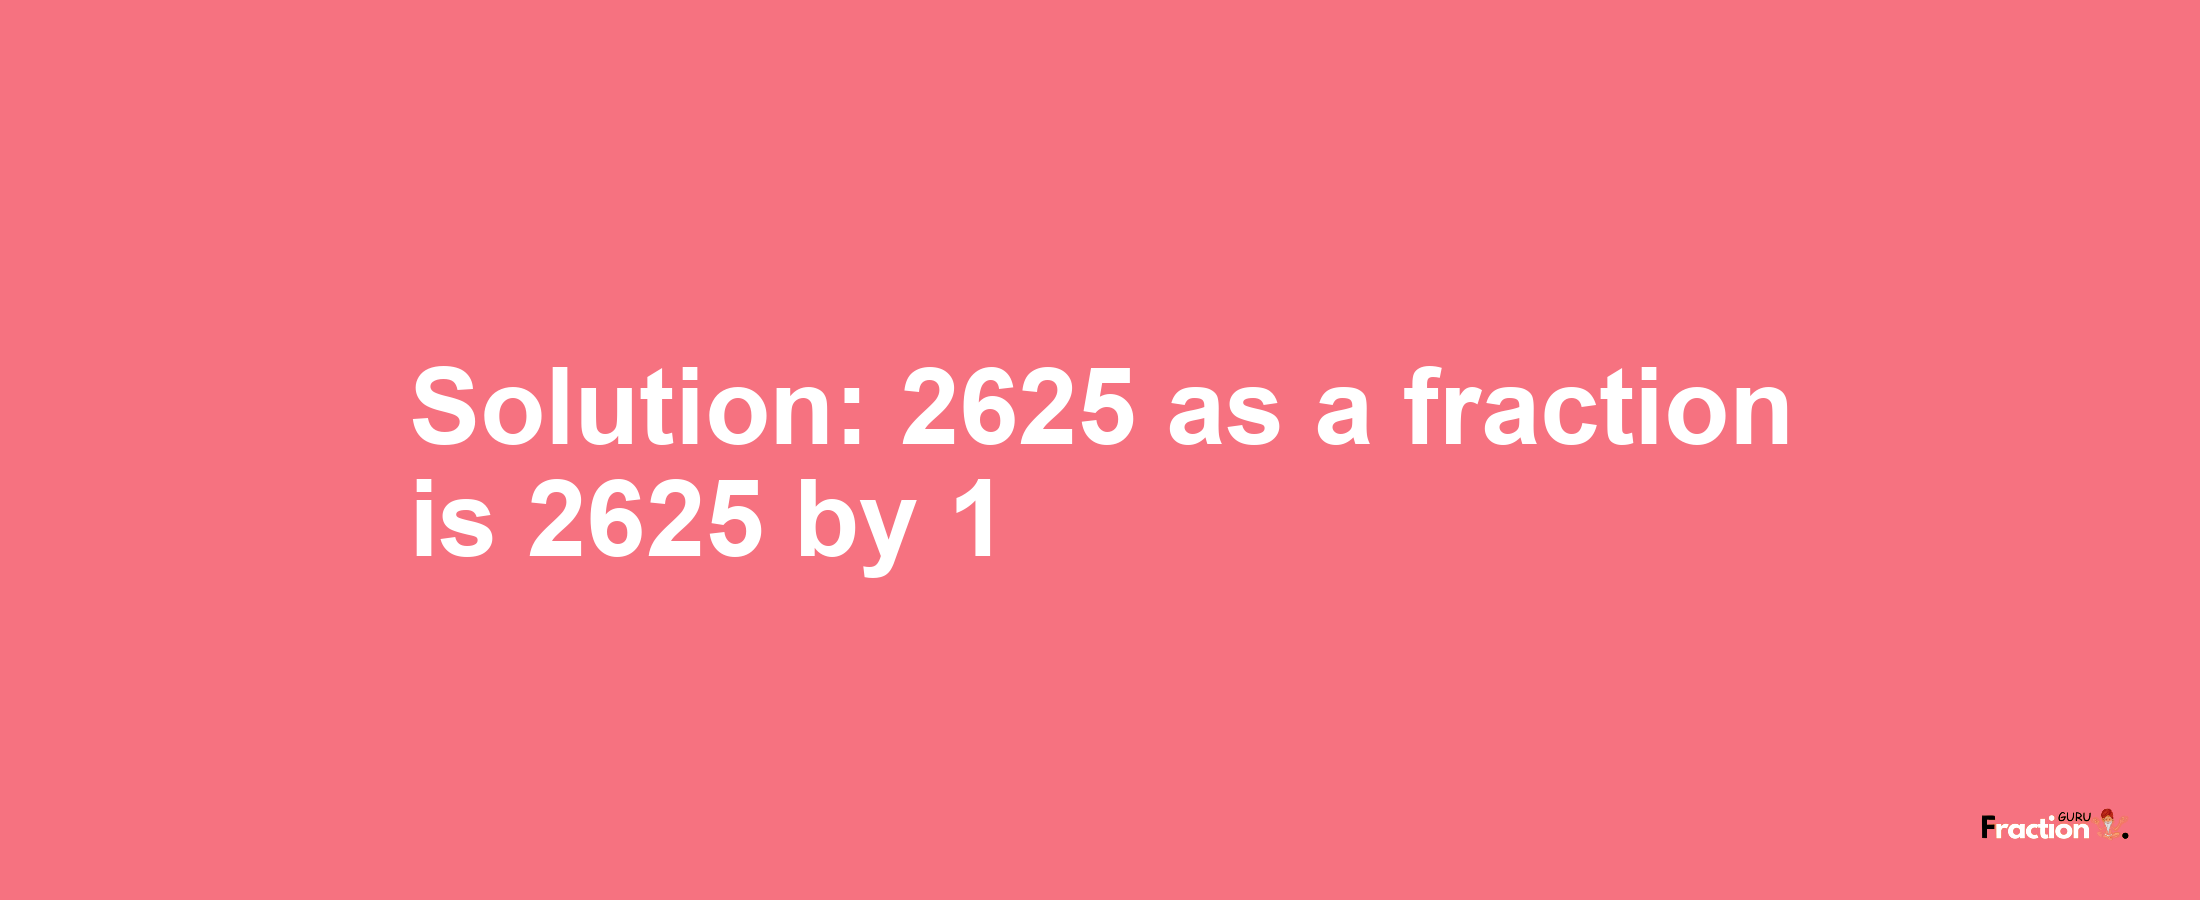 Solution:2625 as a fraction is 2625/1